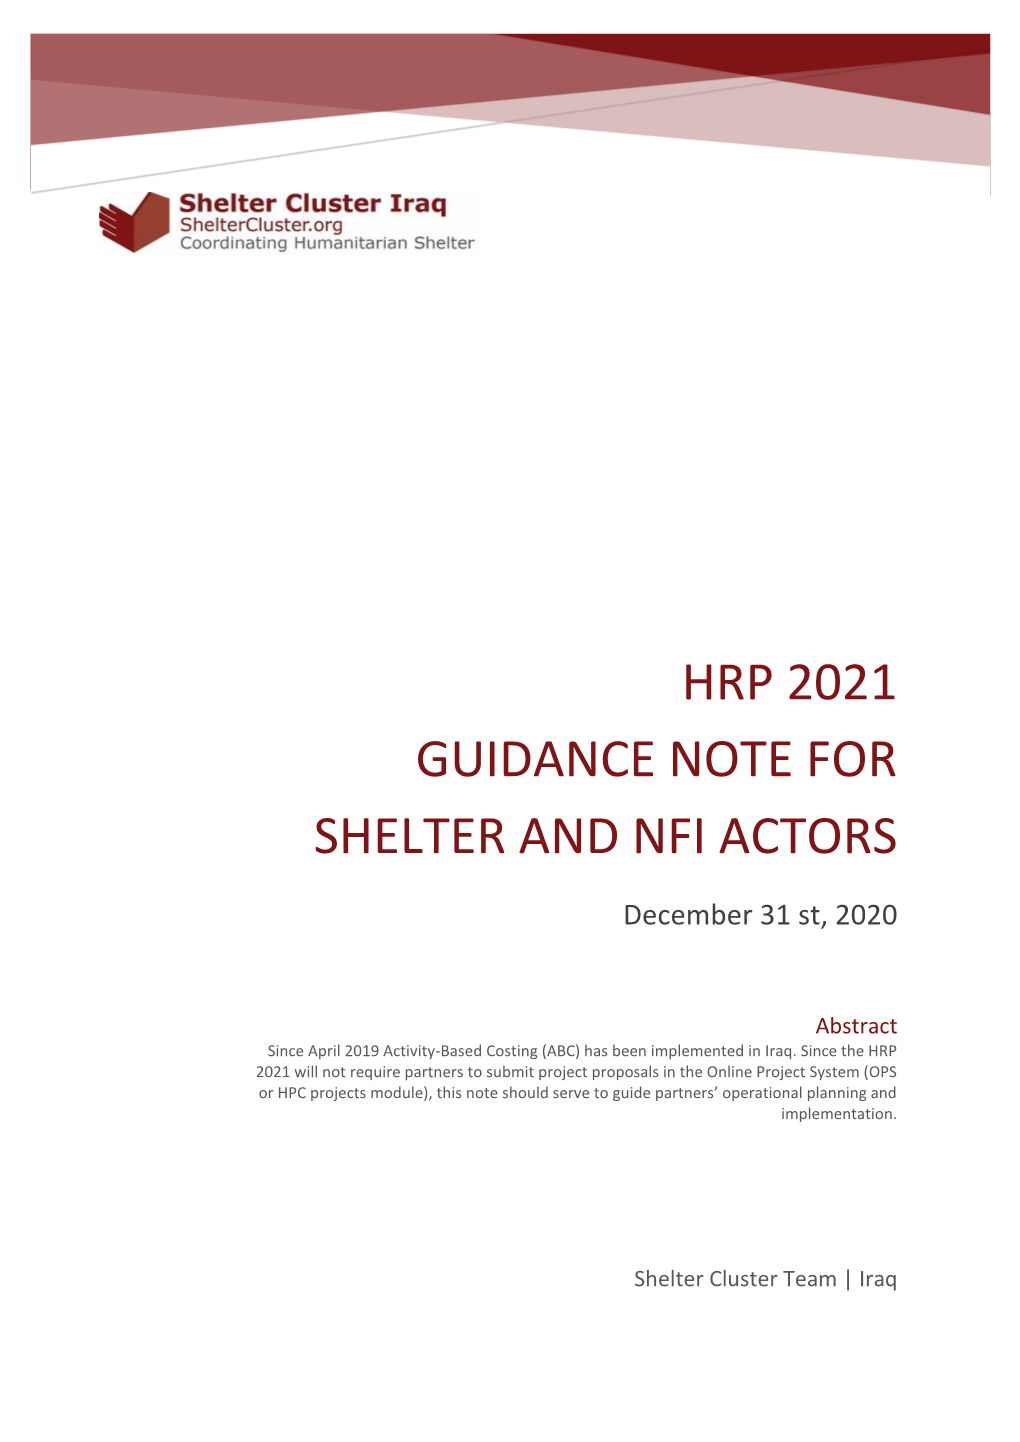 Hrp 2021 Guidance Note for Shelter and Nfi Actors